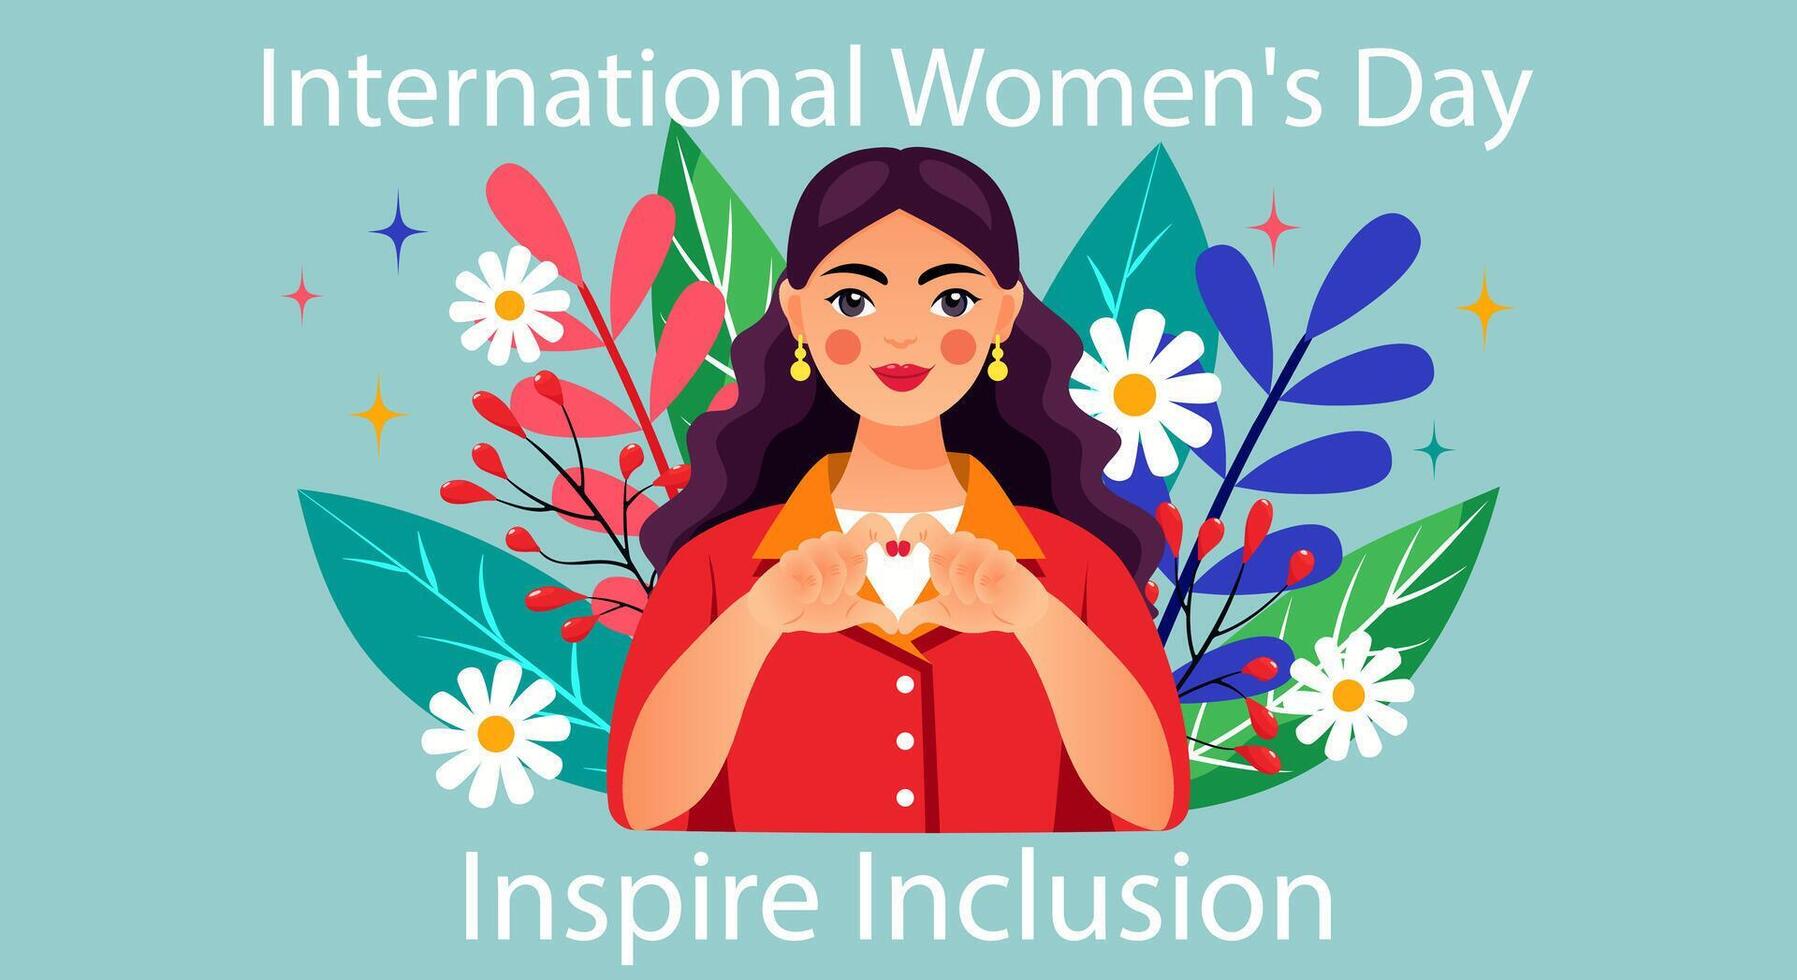 Happy young girl on a background of flowers and leaves makes a heart gesture with her hands. Inspirational background for International Womens Day on March 8th Inspire Inclusion. Vector illustration.